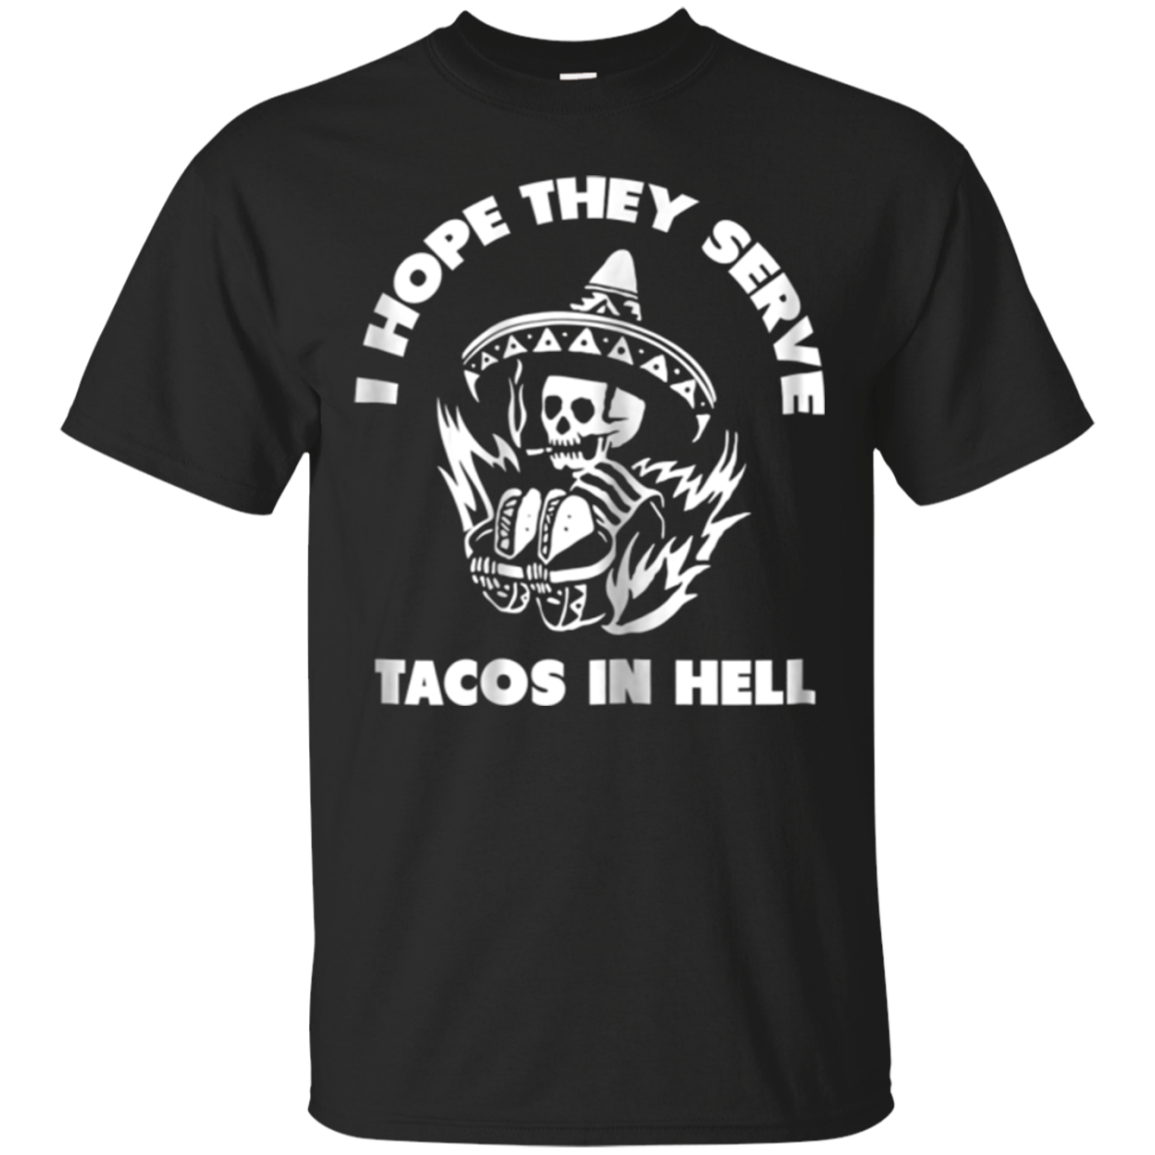 I Hope They Serve Tacos In Hell - Vintage Funny T-shirt T Shirt For 